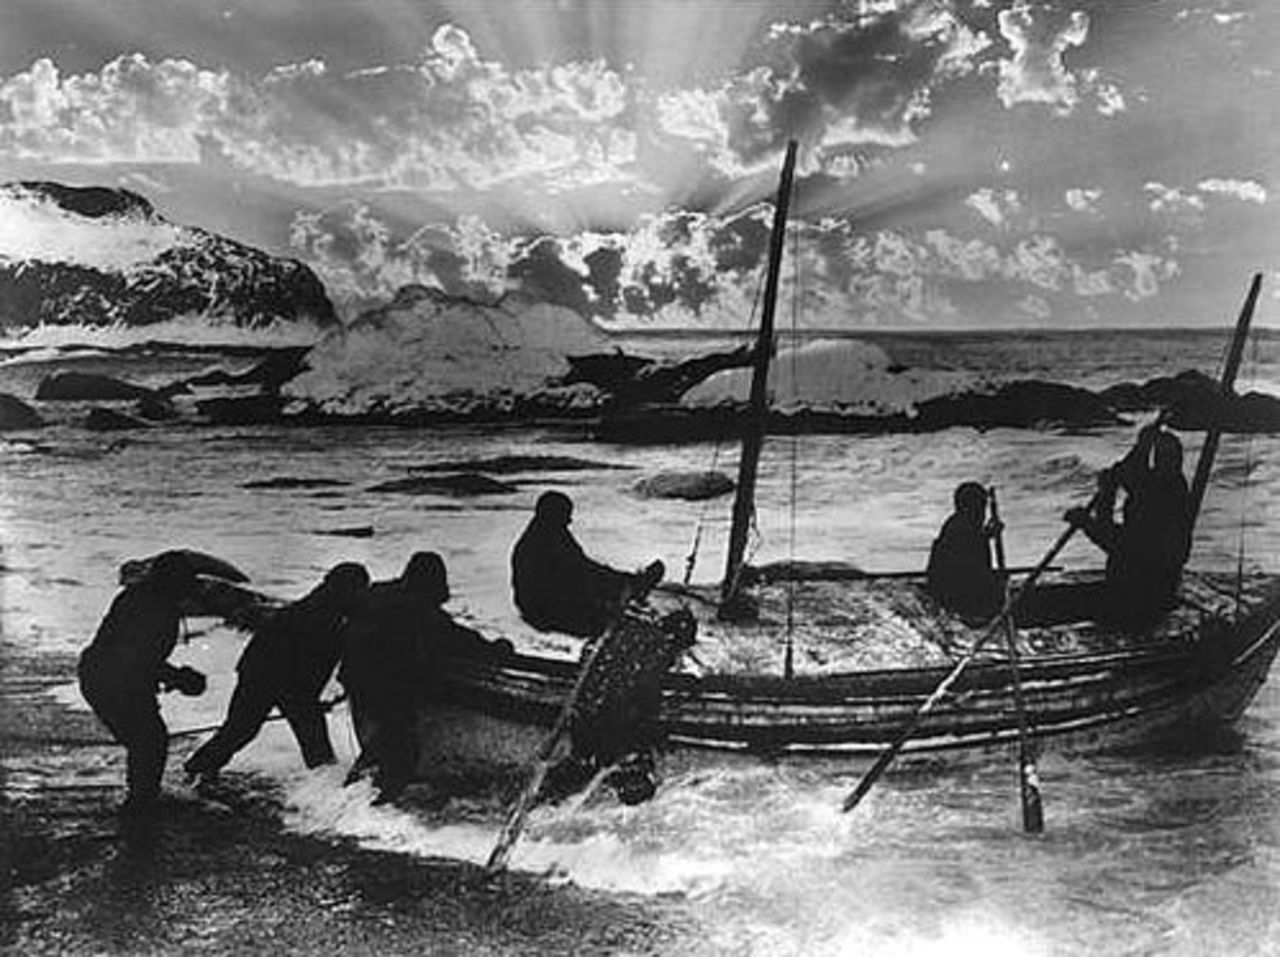 This original picture from 1916 shows Ernest Shackleton and his five man crew embarking on the 800 nautical mile rescue mission across the Antarctic after losing their ship in the ice.